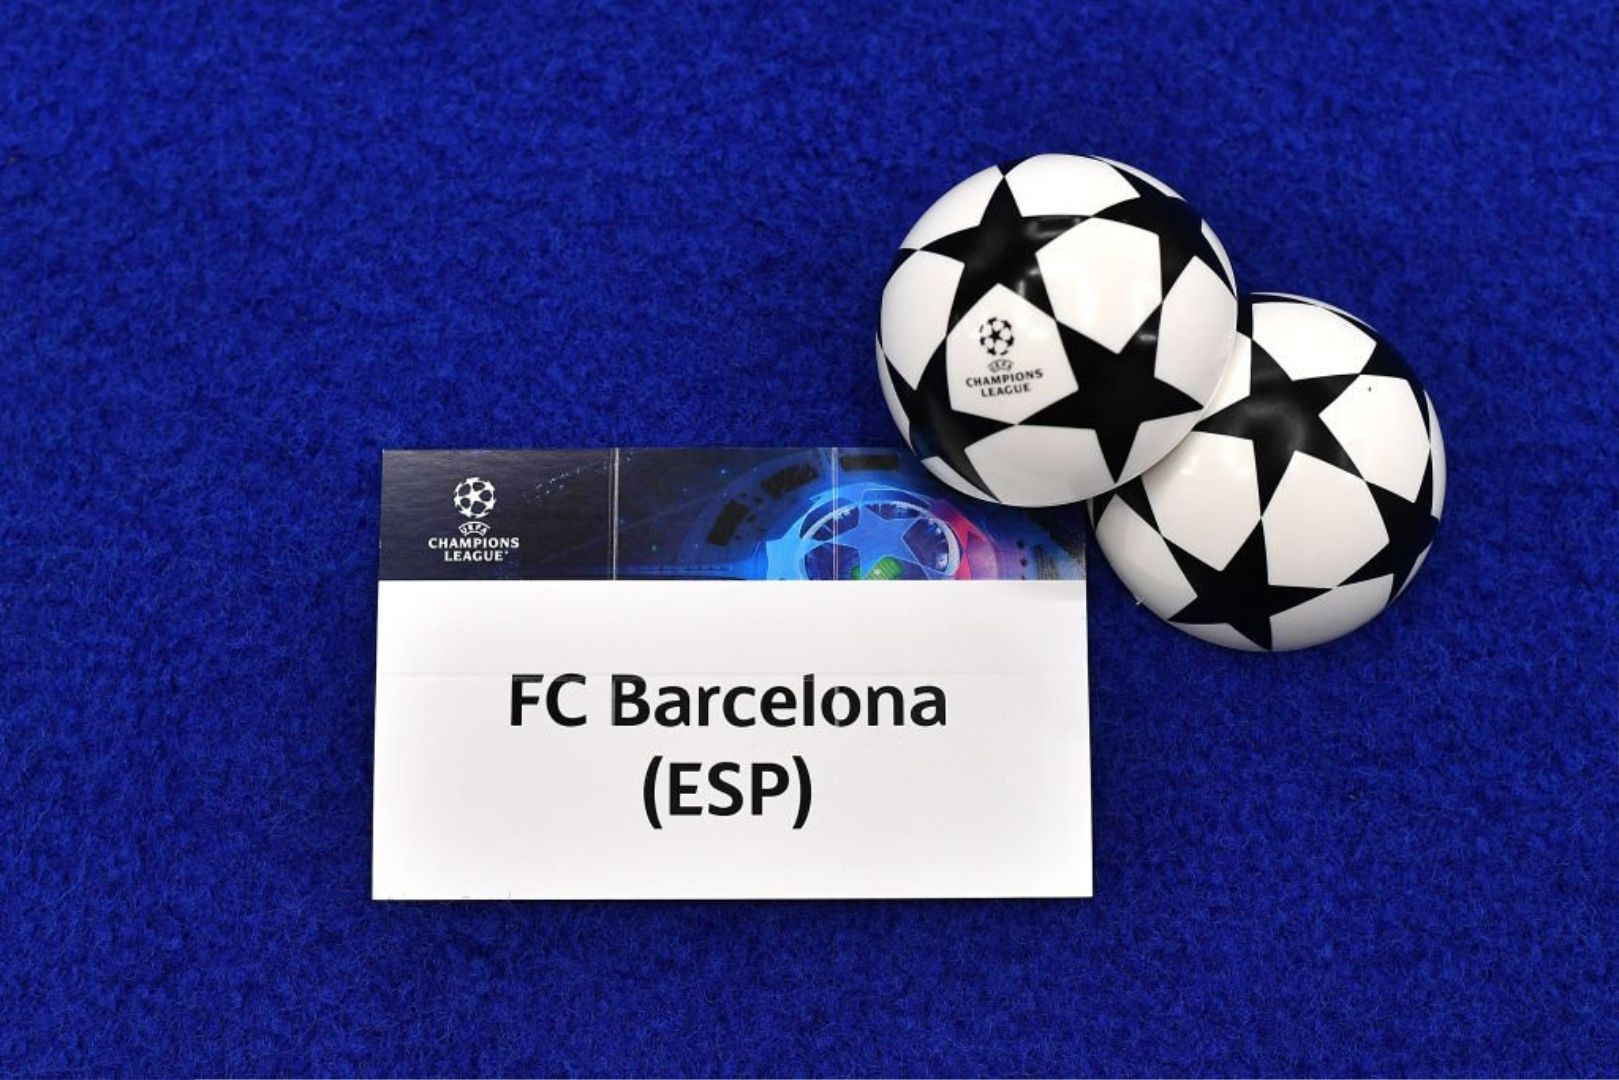 UCL Draw card of FC Barcelona